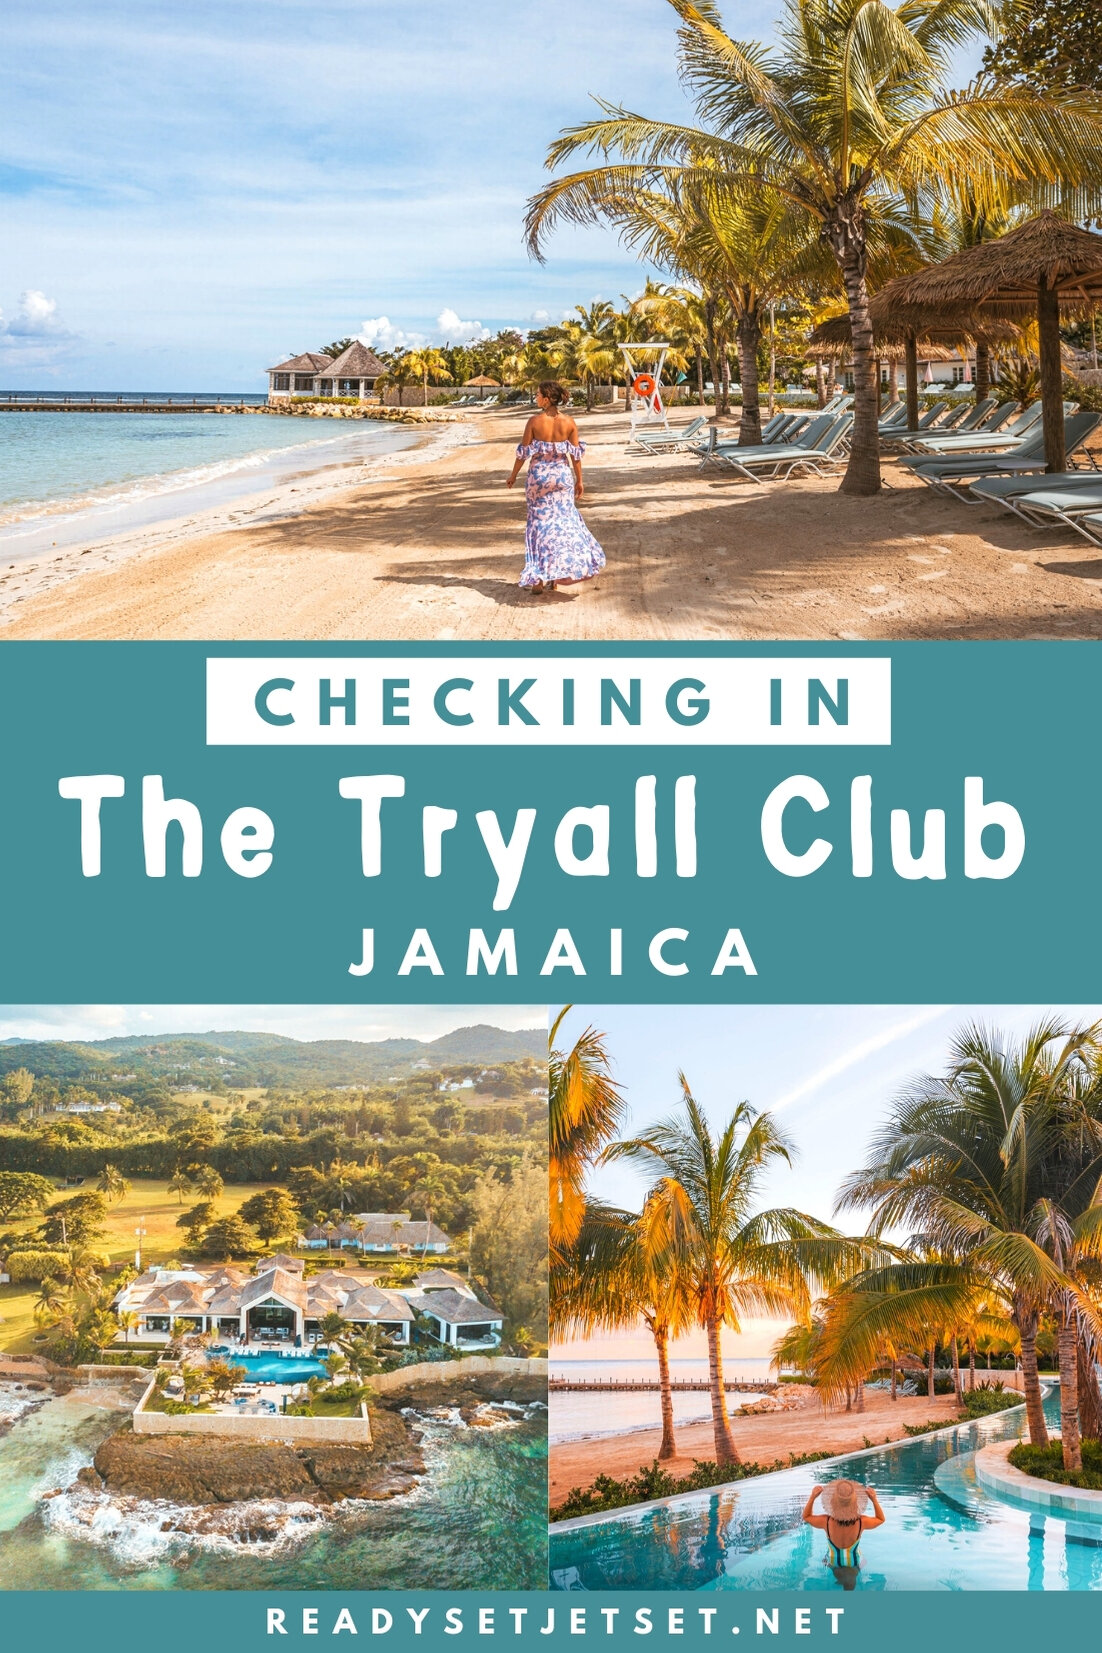 Checking In: The Following Seas Villa at The Tryall Club in Jamaica